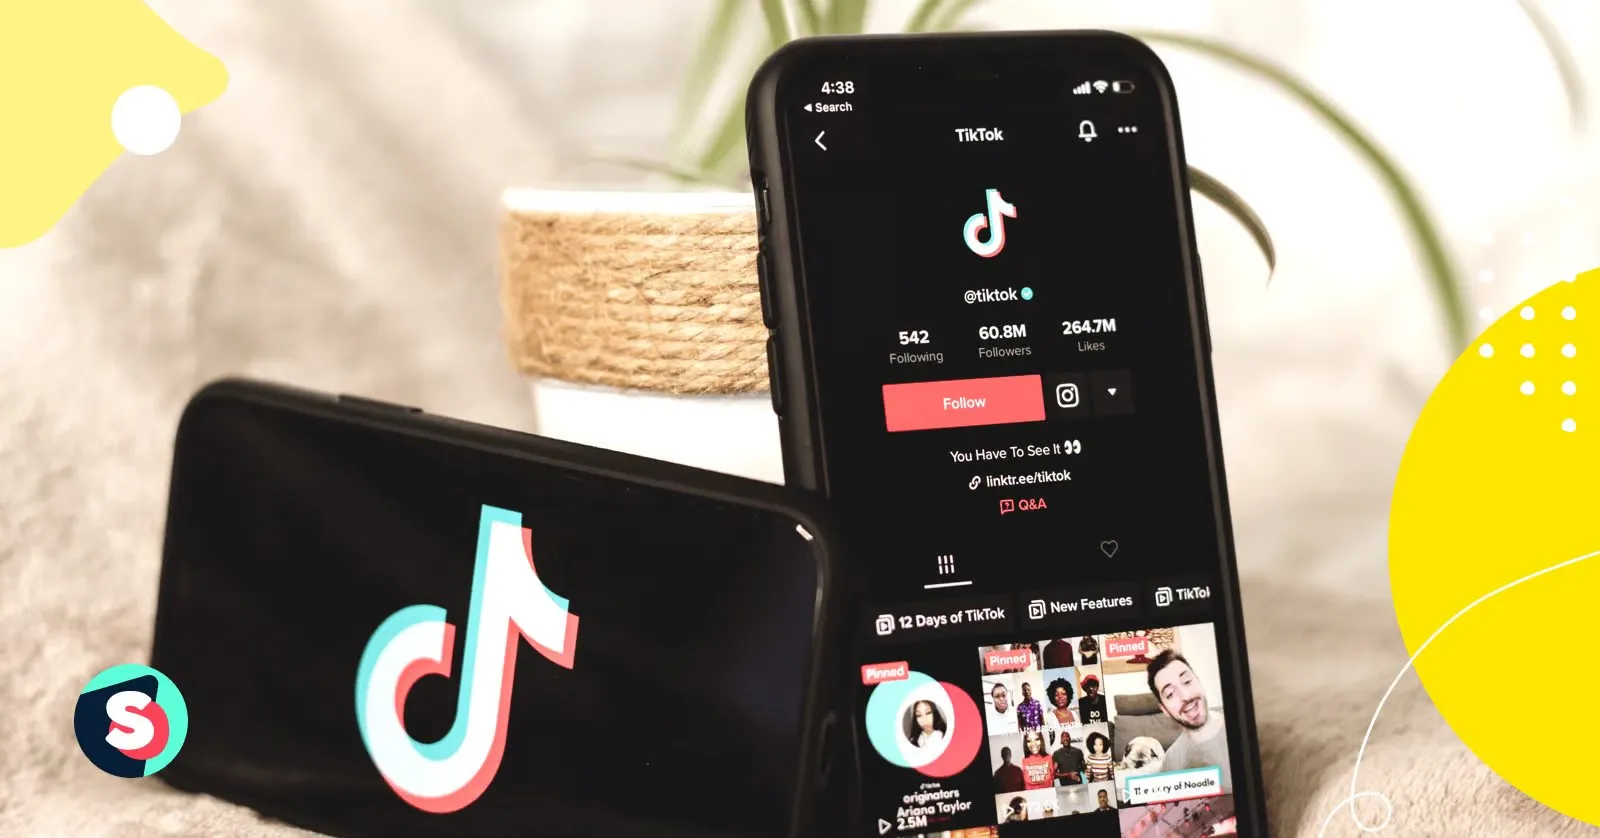 Use relevant keywords and phrases in your captions to increase the chances of your TikTok video appearing in user feeds